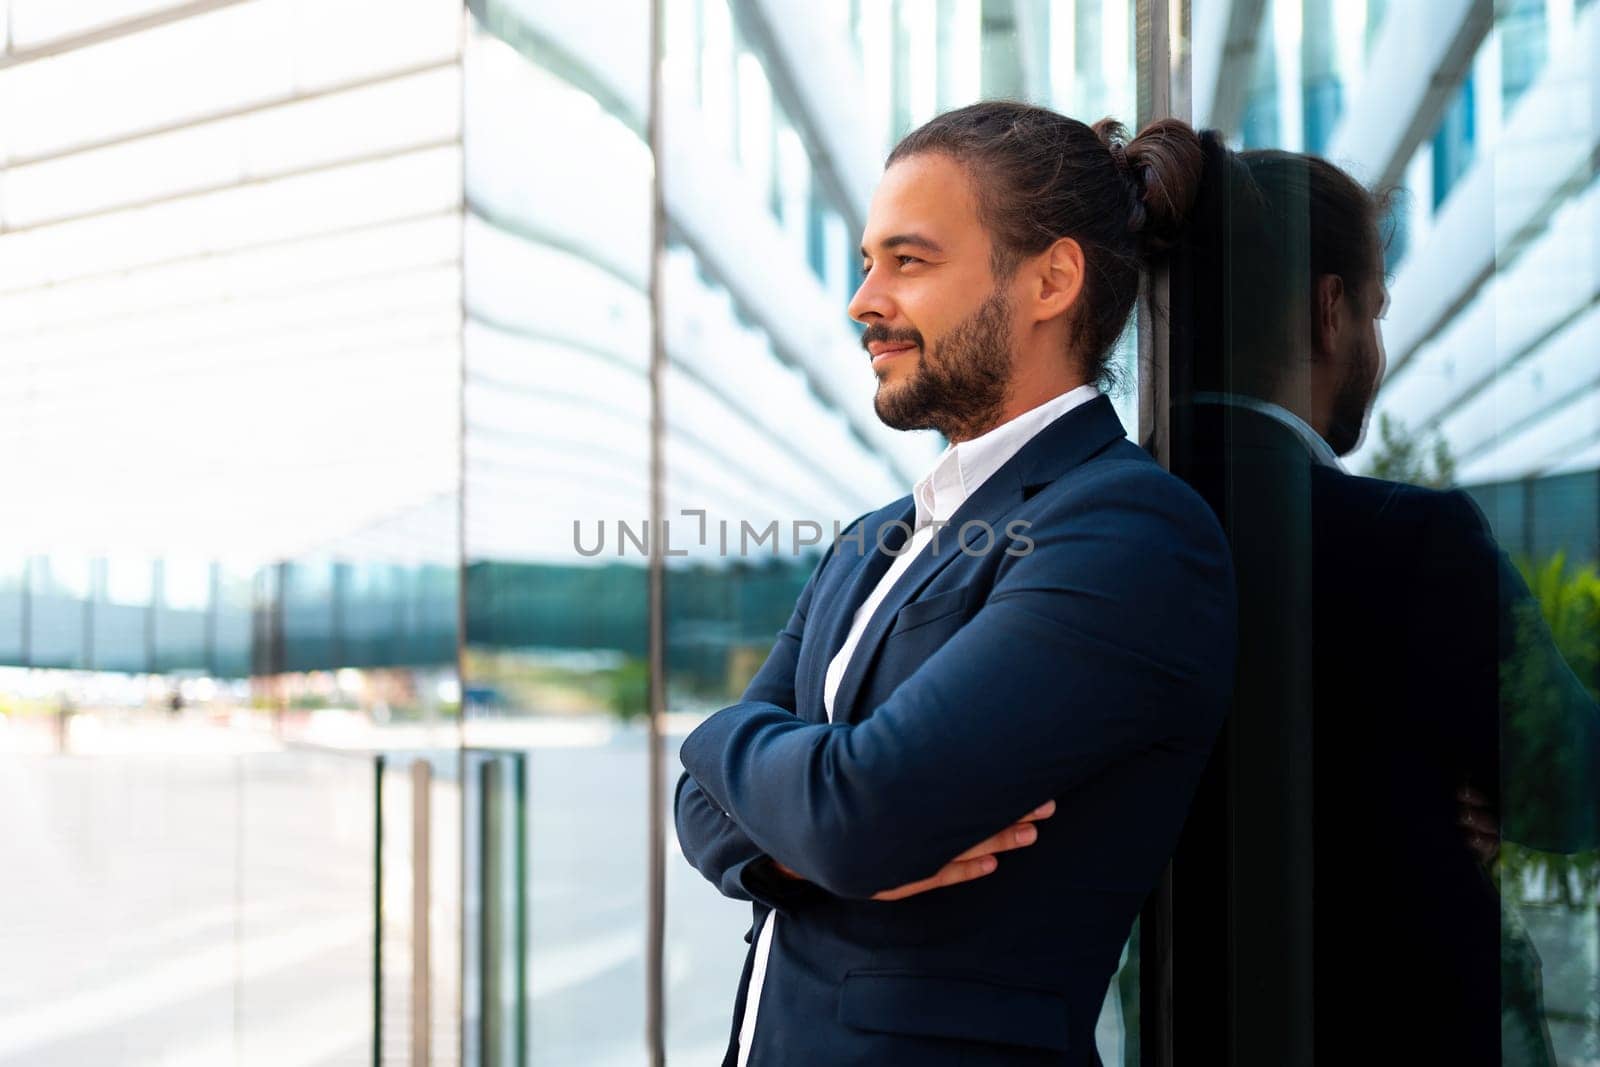 Confidence successful businessman in suit with beard standing in front of office glass building lean on wall arm crossed looking away and smile. Hispanic modern business man portrait. Business suit